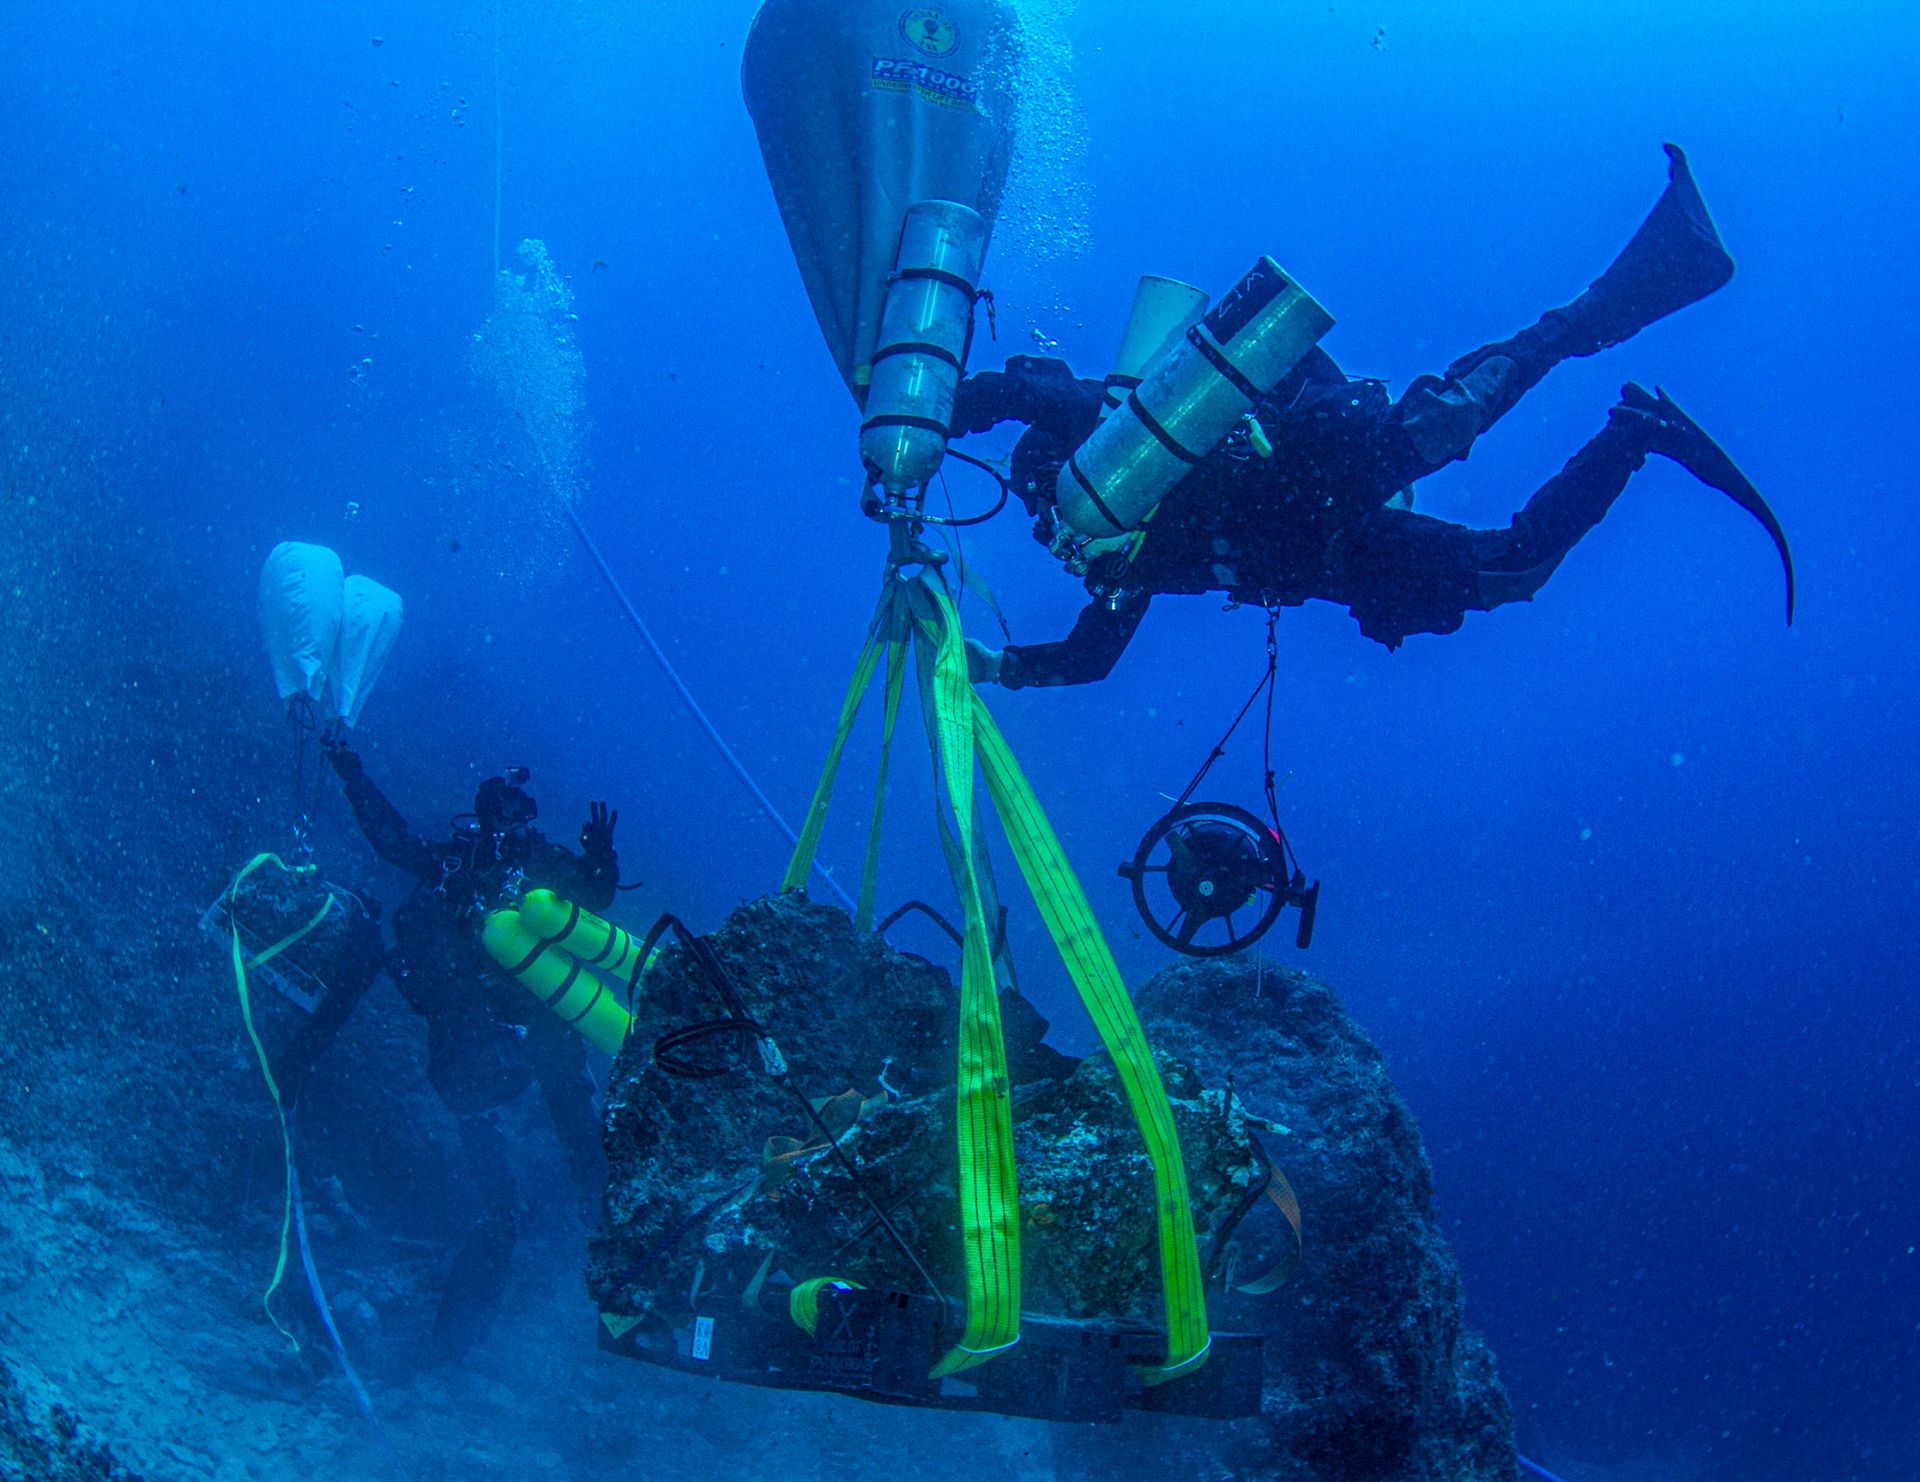 Swiss researchers uncover second ship in Antikythera shipwreck investigation